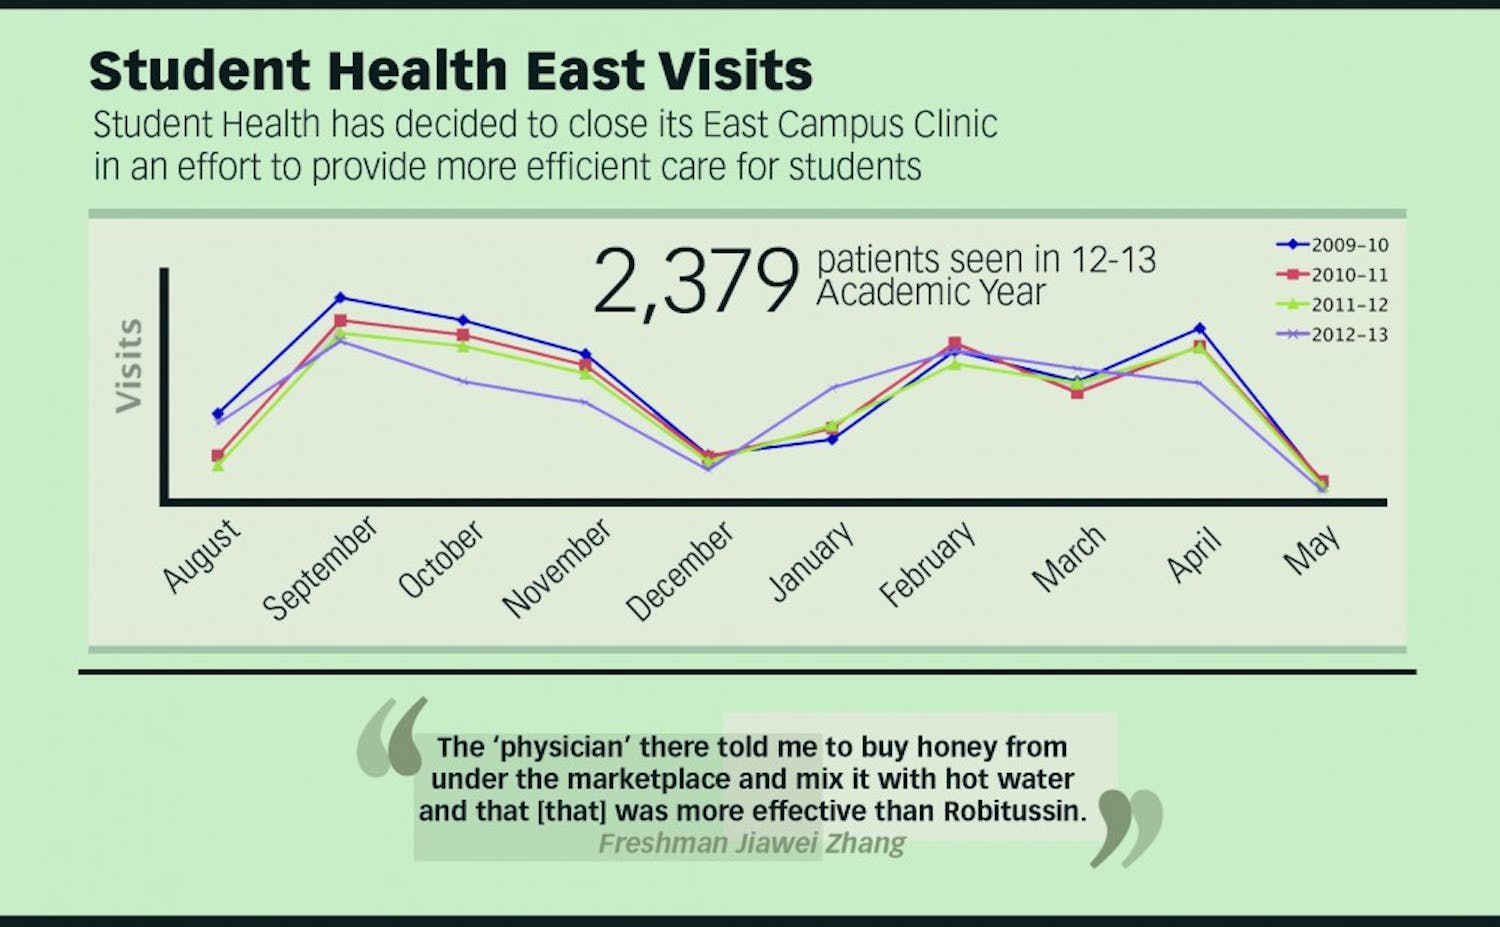 Visits to the student health center on East Campus have fluctuated in the past four years.